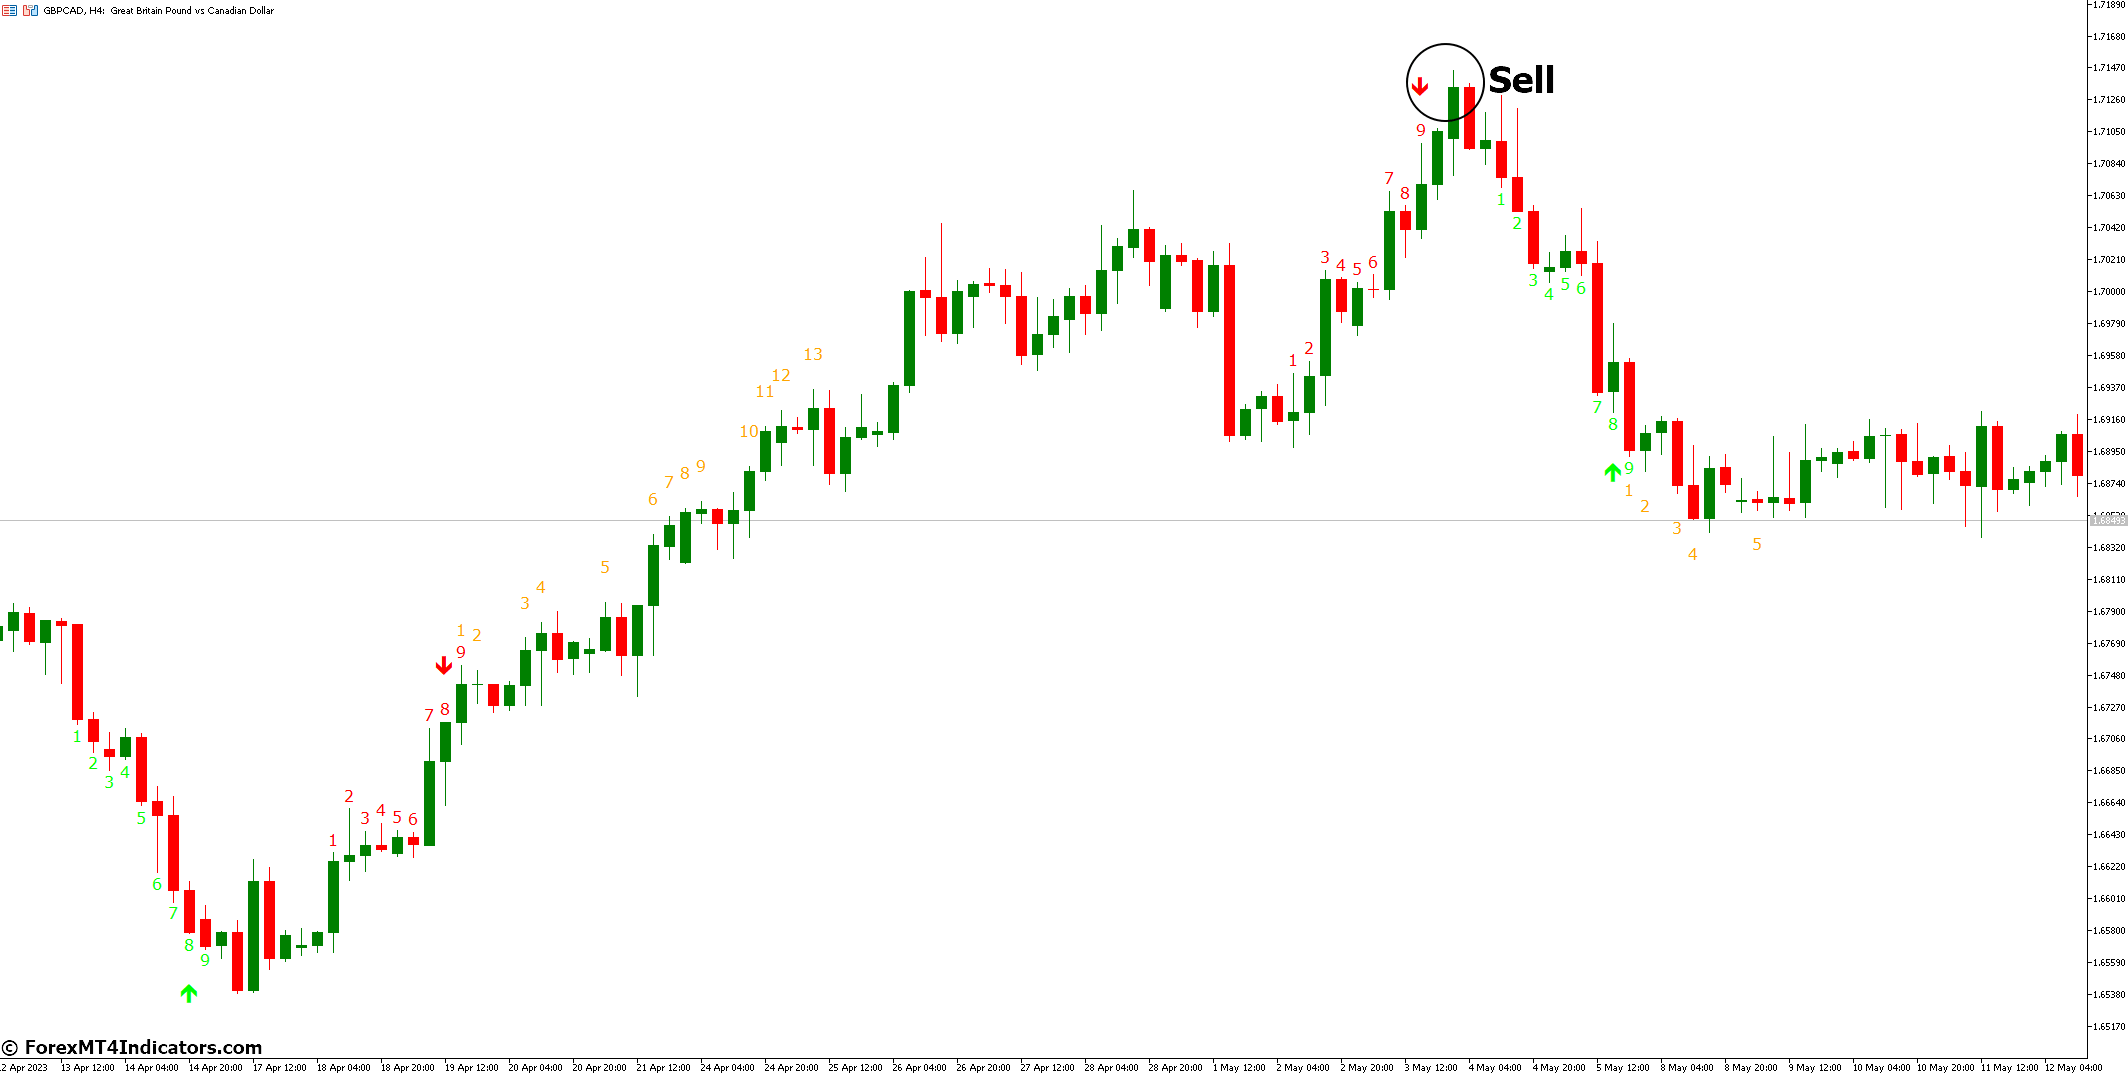 How to Trade with TD Sequential Ultimate MT5 Indicator - Sell Entry